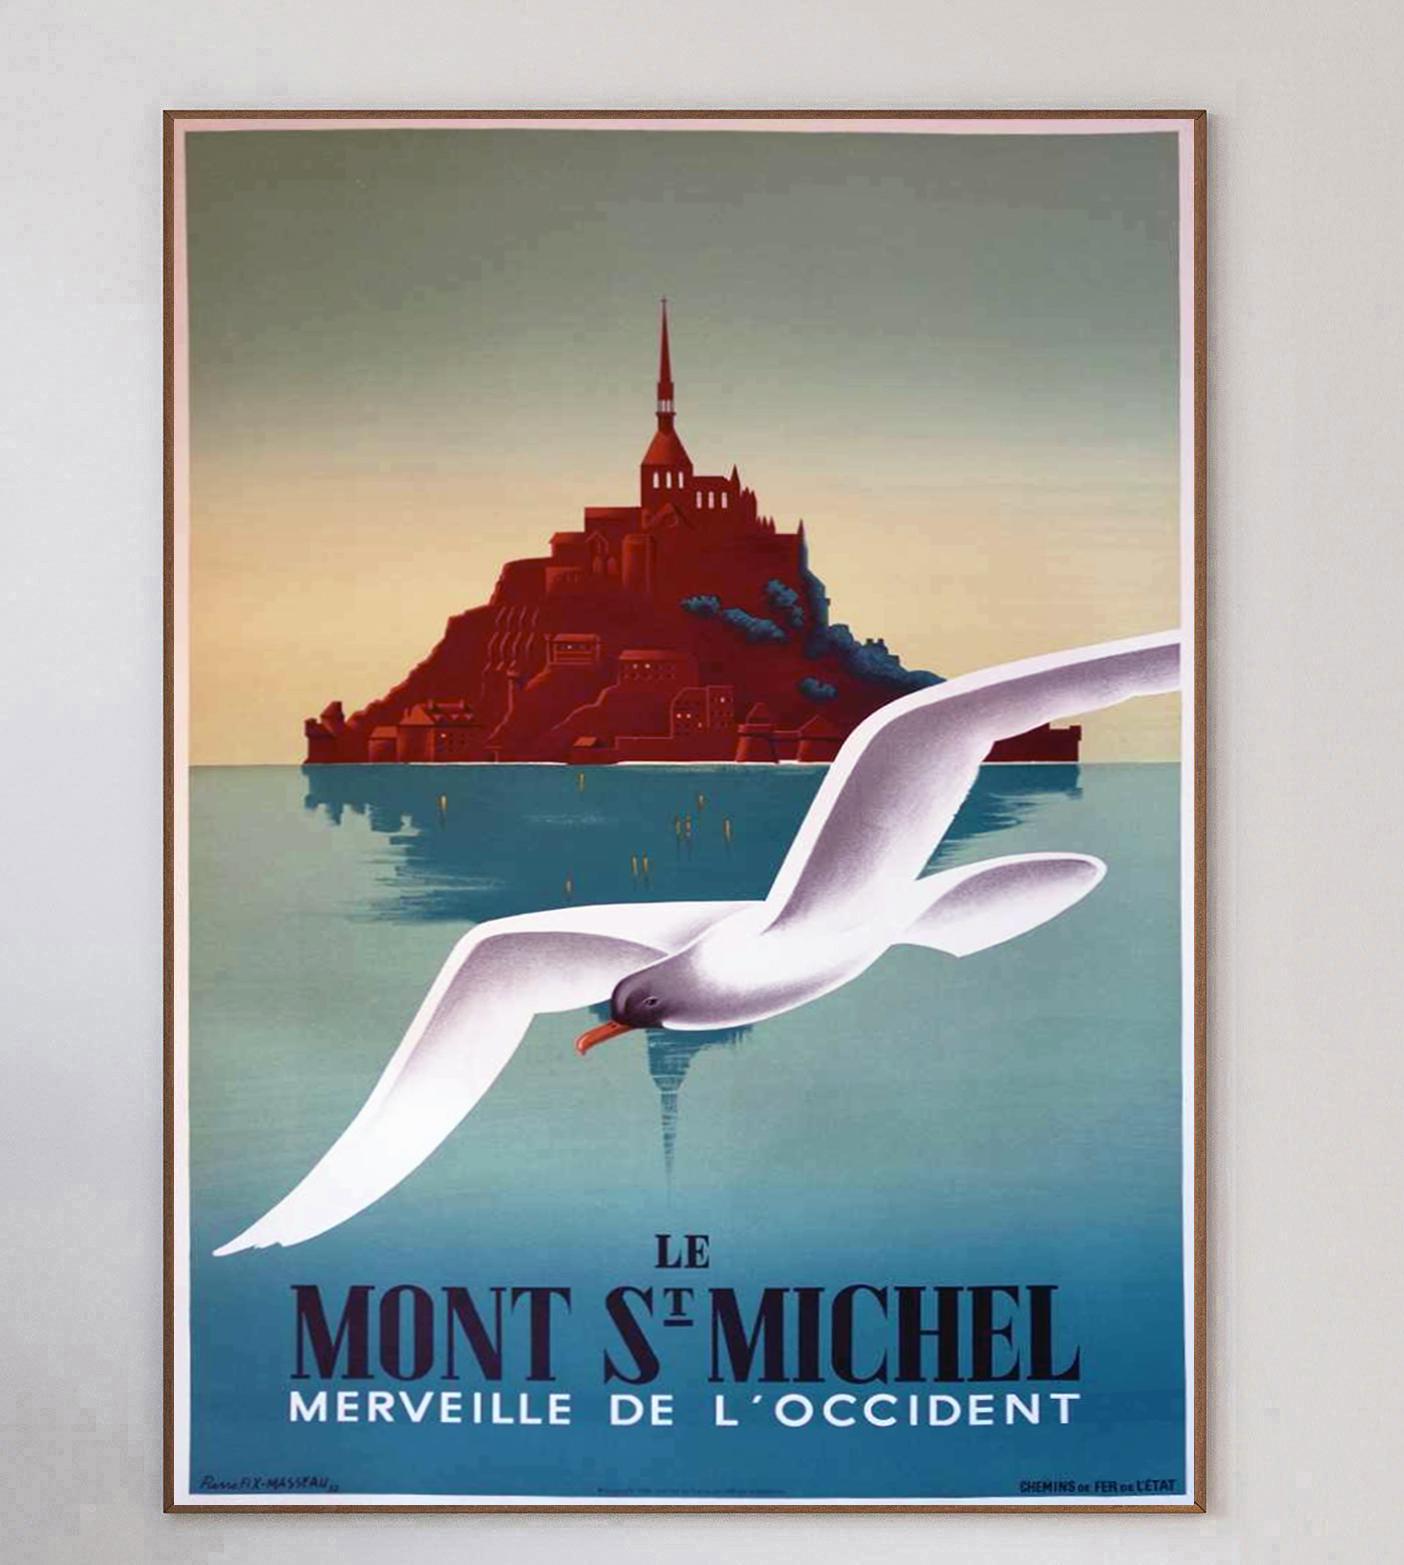 This gorgeous & rare stone lithograph poster was designed by the great French poster artist Fix Masseau and released in 1988.

Promoting Mont Saint-Michel, the iconic tidal island in Normandy, France in the English Channel, this beautiful and